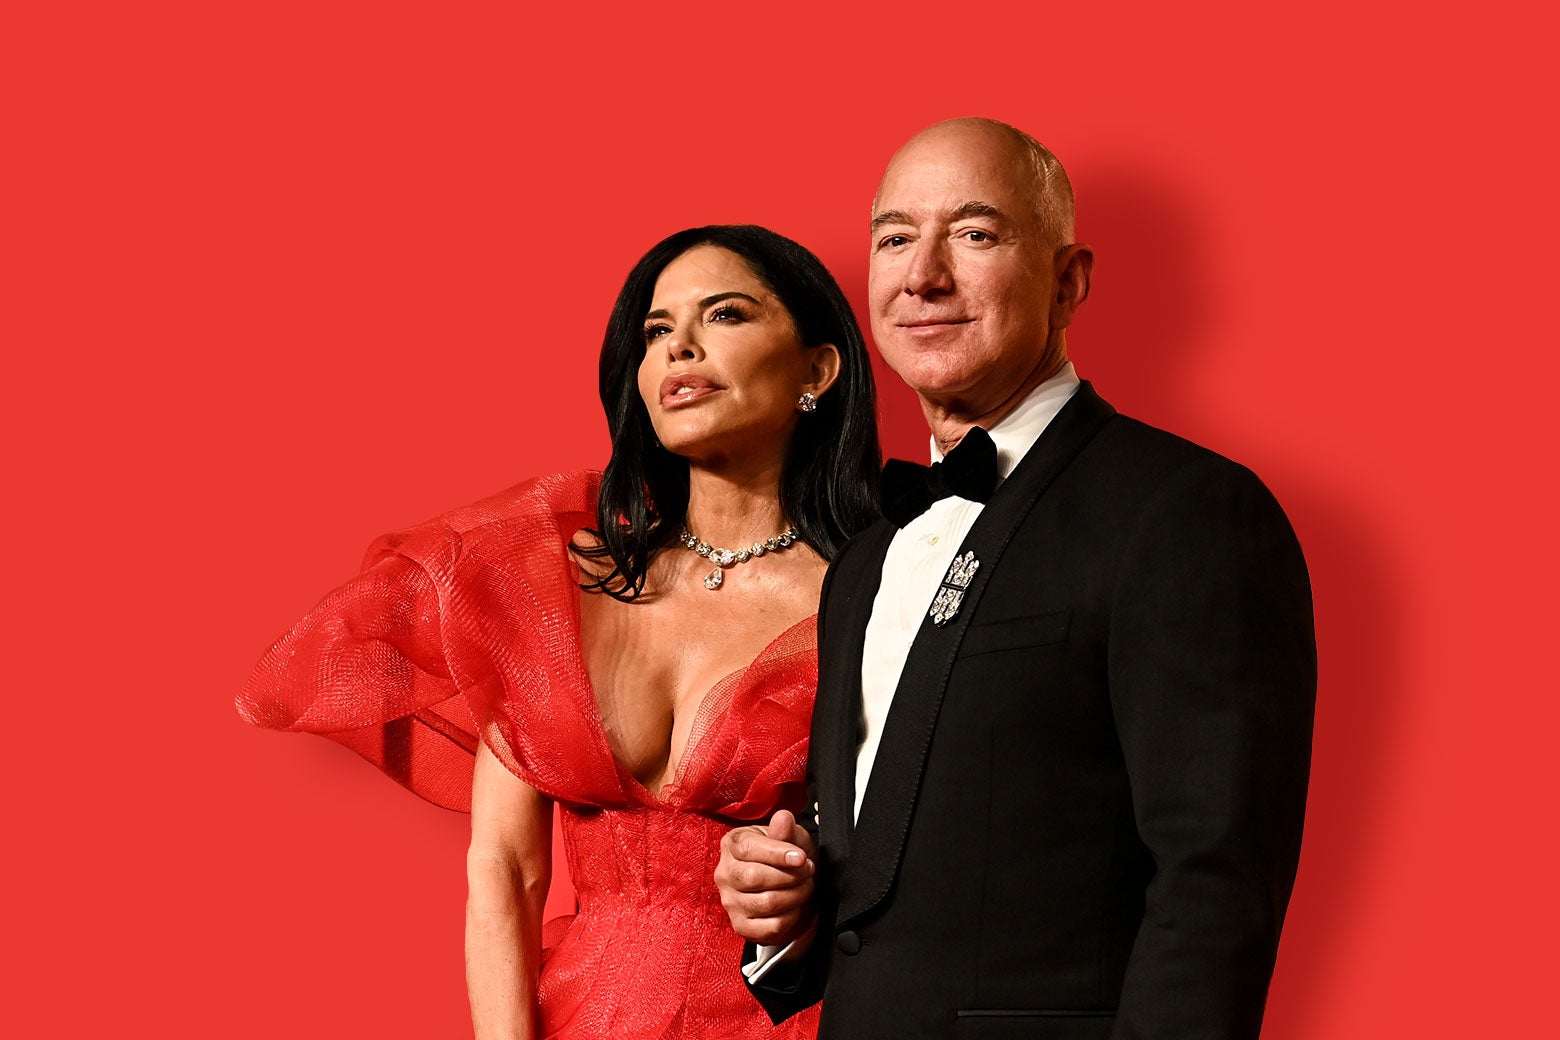 
BEVERLY HILLS, CALIFORNIA - MARCH 10: (L-R) Lauren Sánchez and Jeff Bezos attend the 2024 Vanity Fair Oscar Party Hosted By Radhika Jones at Wallis Annenberg Center for the Performing Arts on March 10, 2024 in Beverly Hills, California. (Photo by Jon Kopaloff/Getty Images for Vanity Fair).